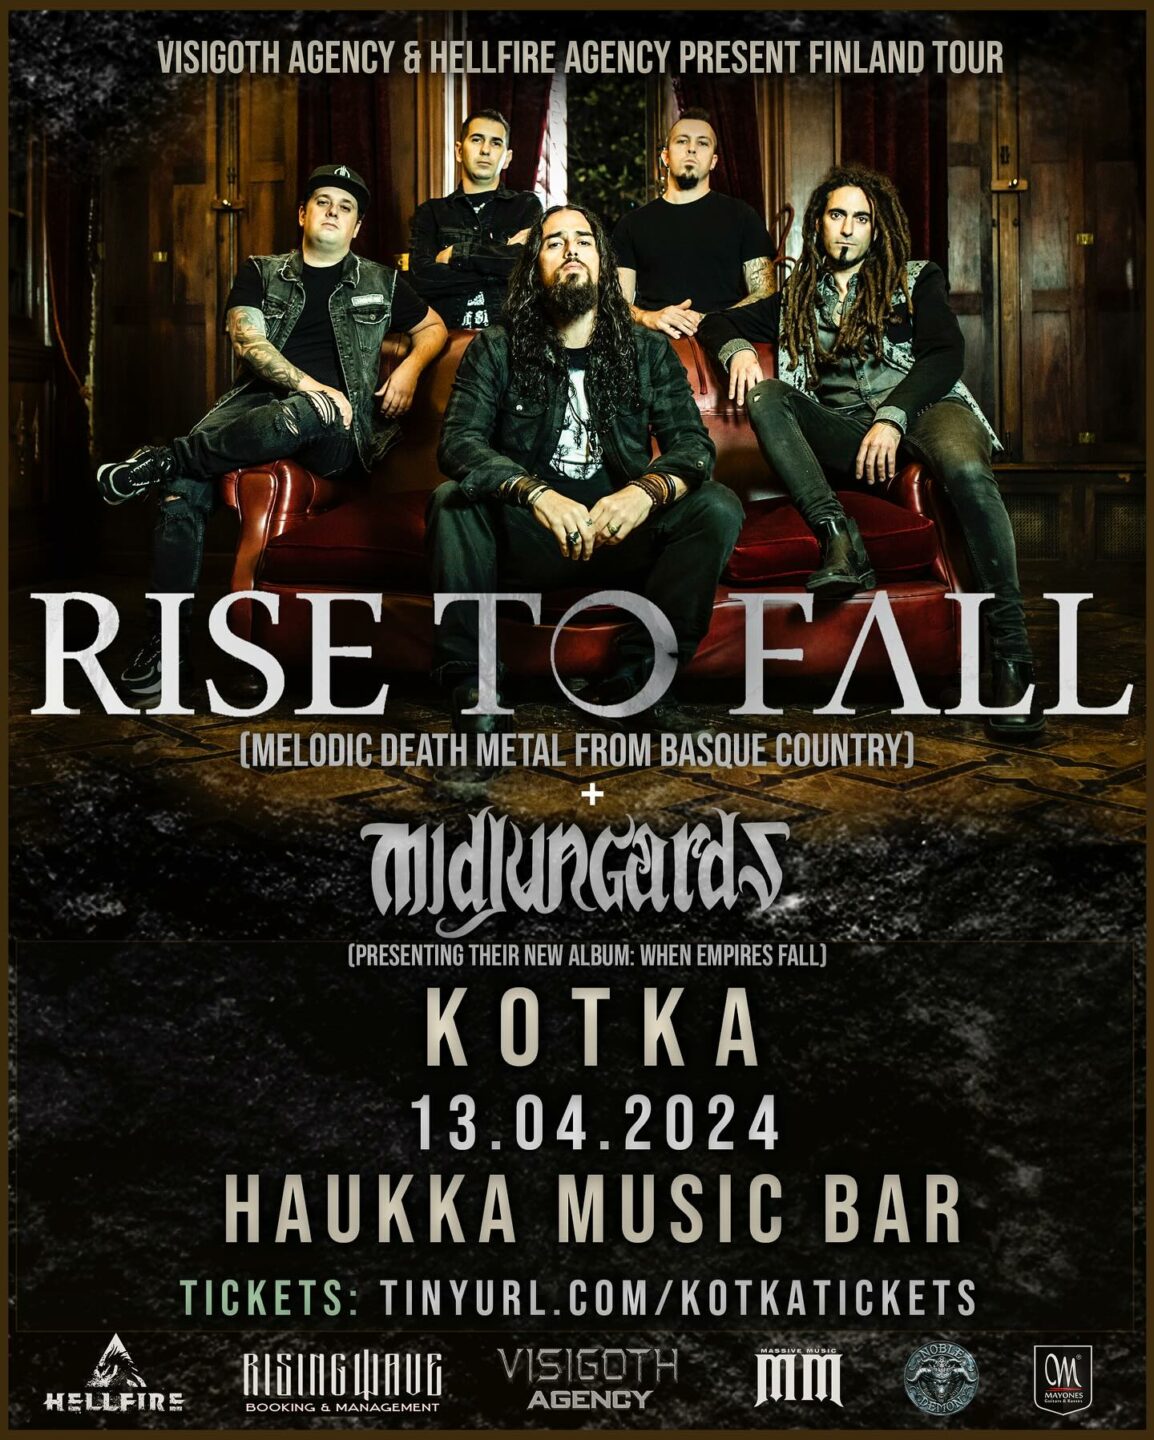 RISE TO FALL + Midjungards